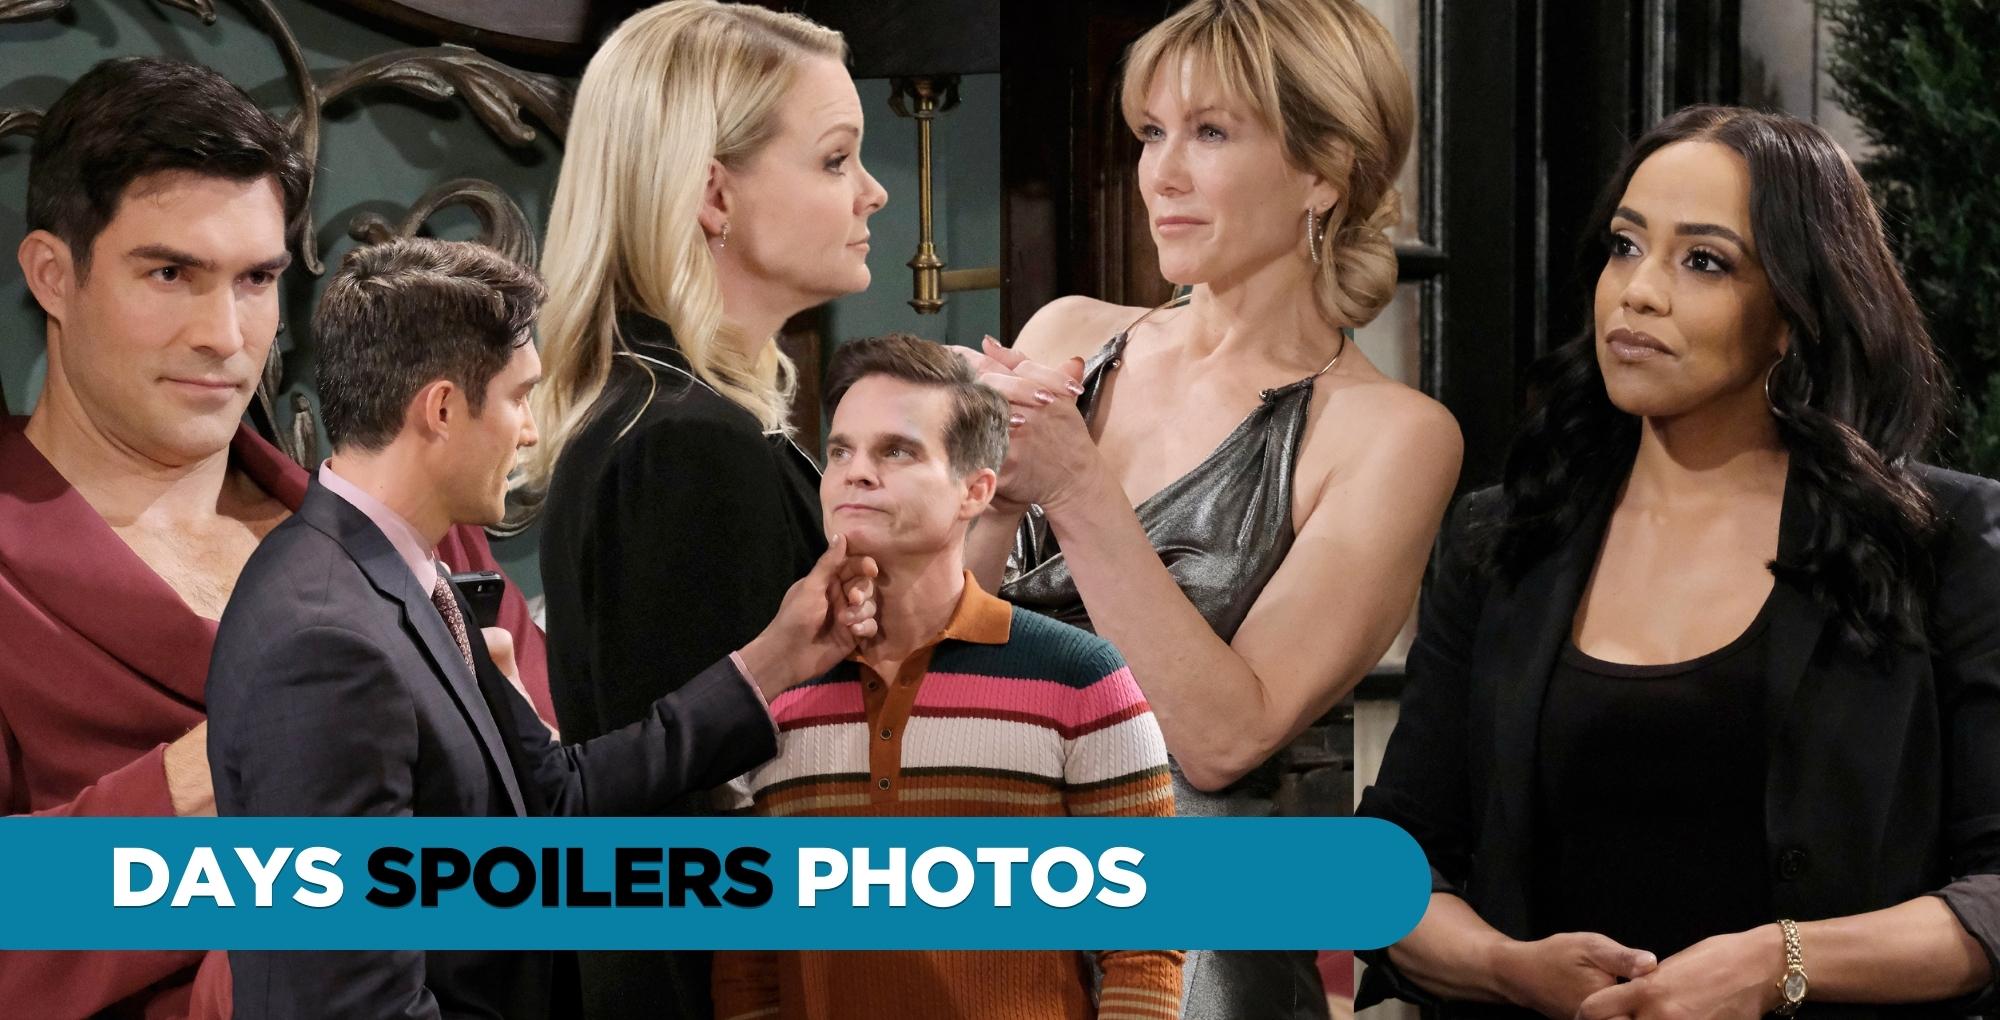 days spoilers photo collage.